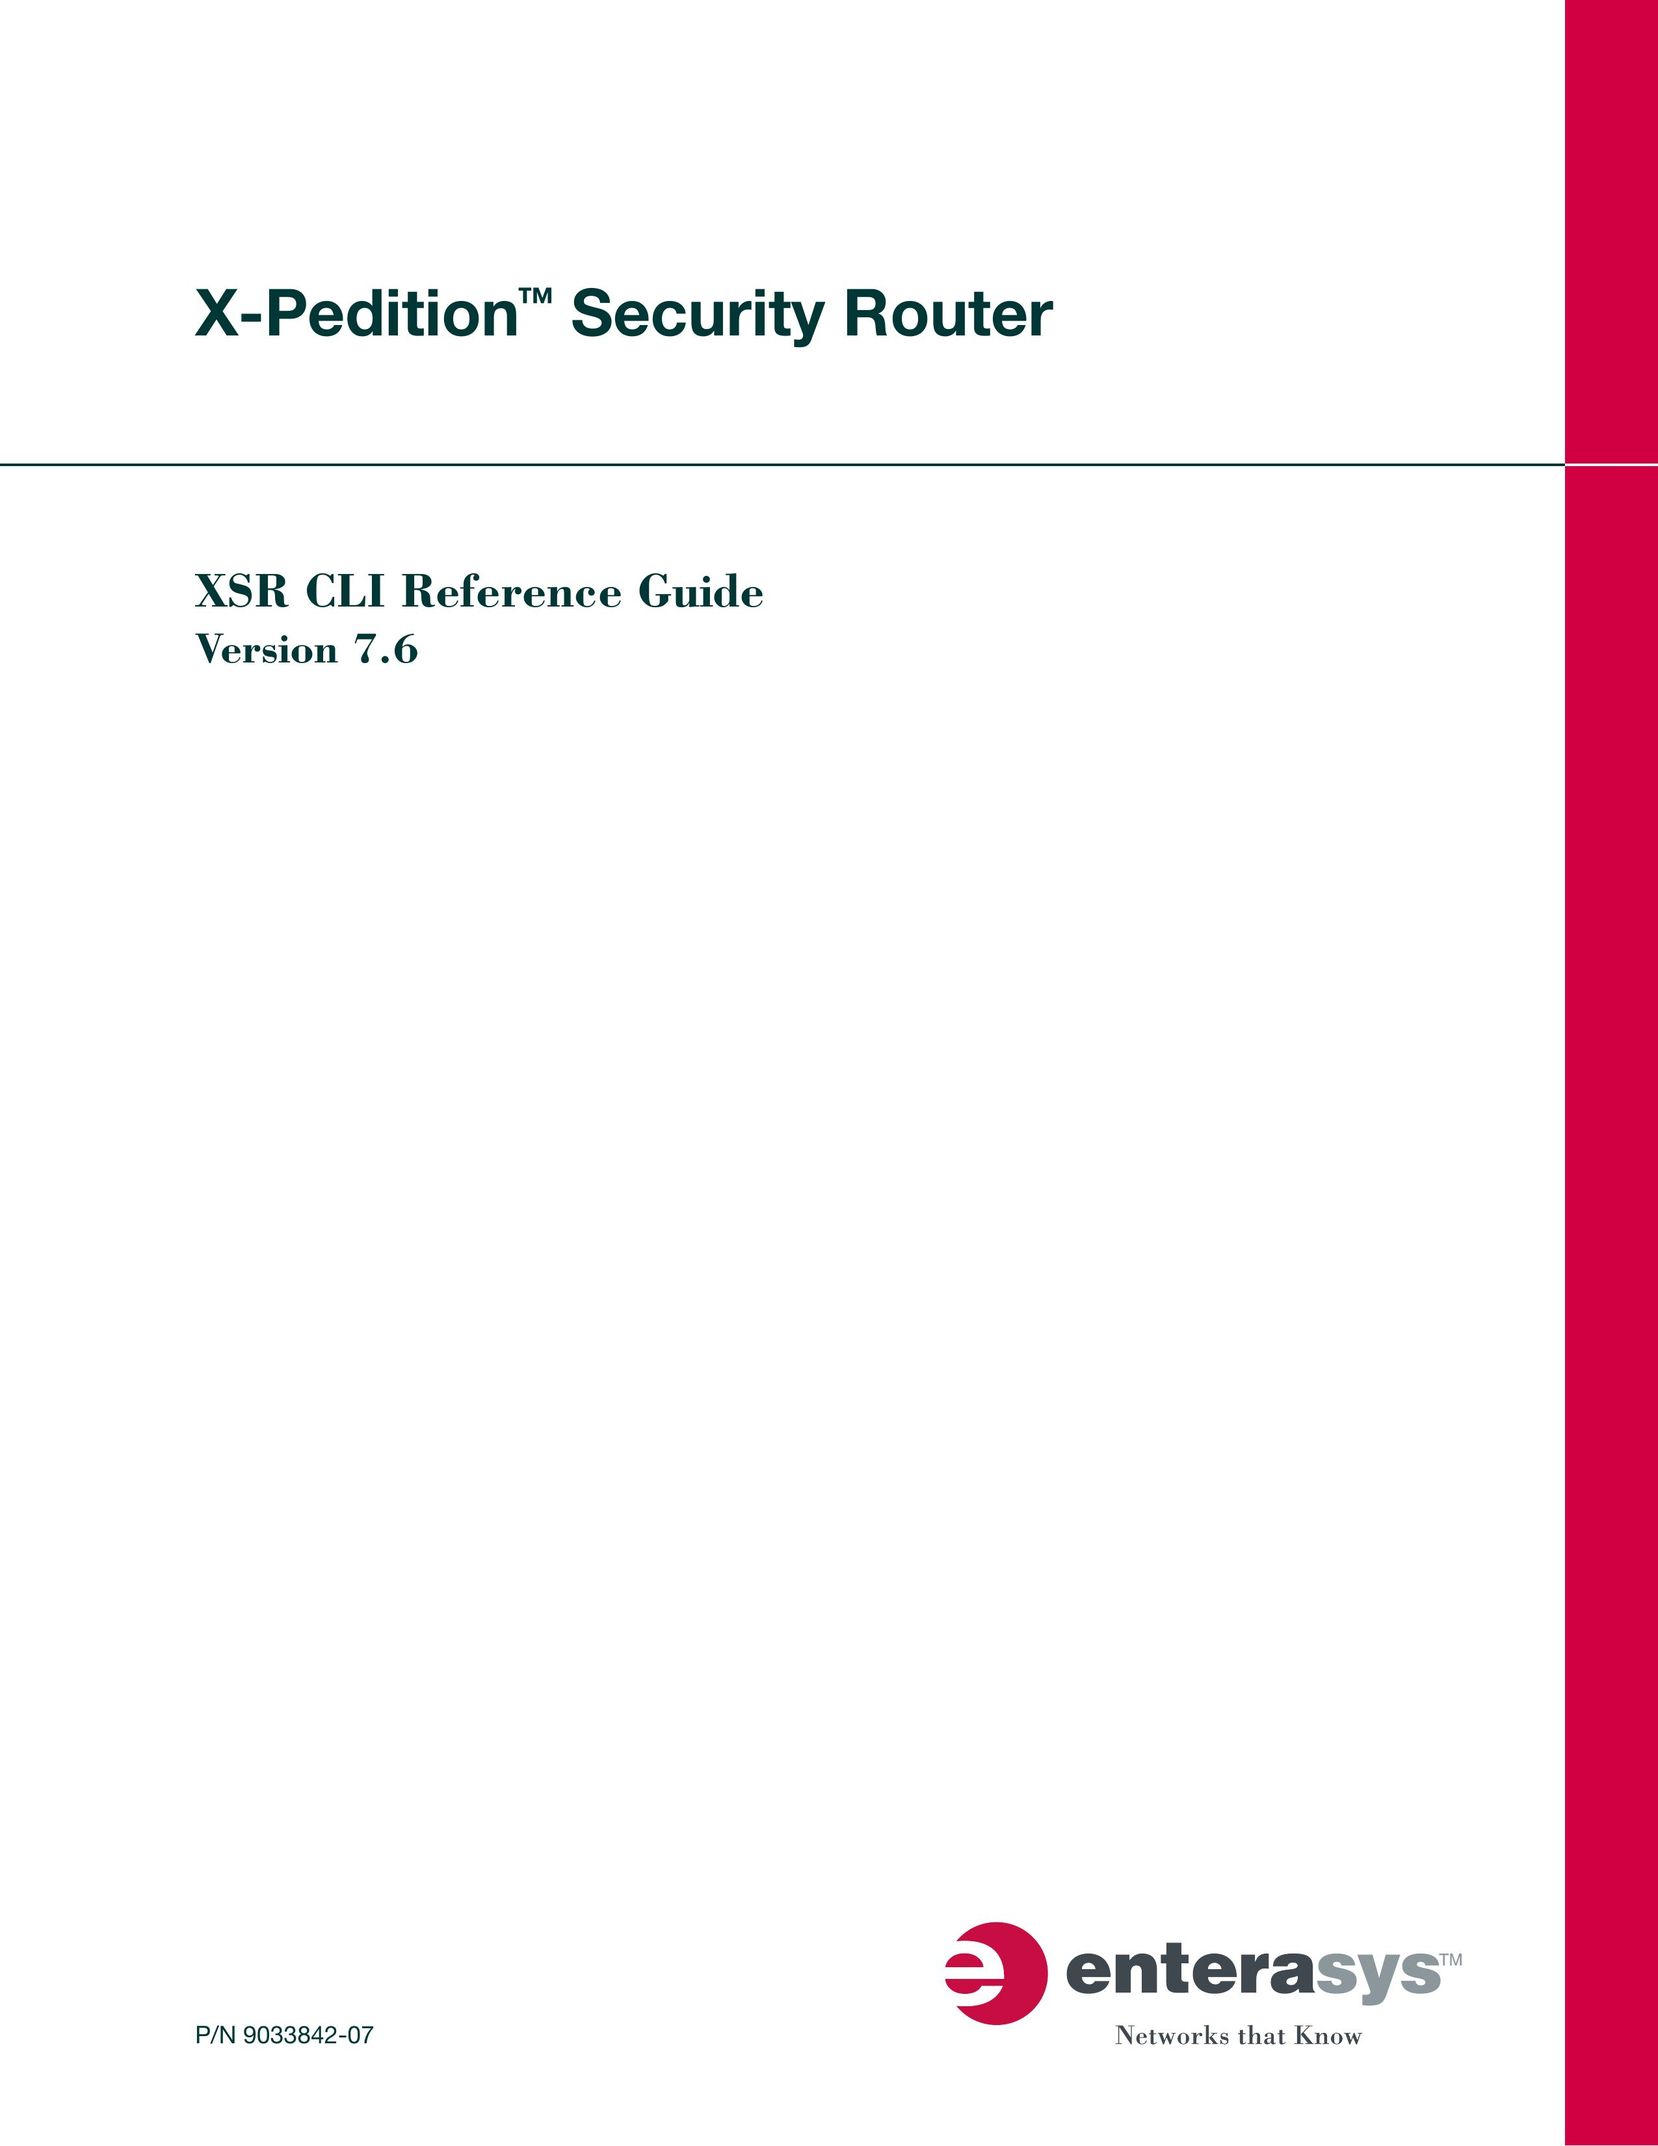 Enterasys Networks XSR CLI Router User Manual